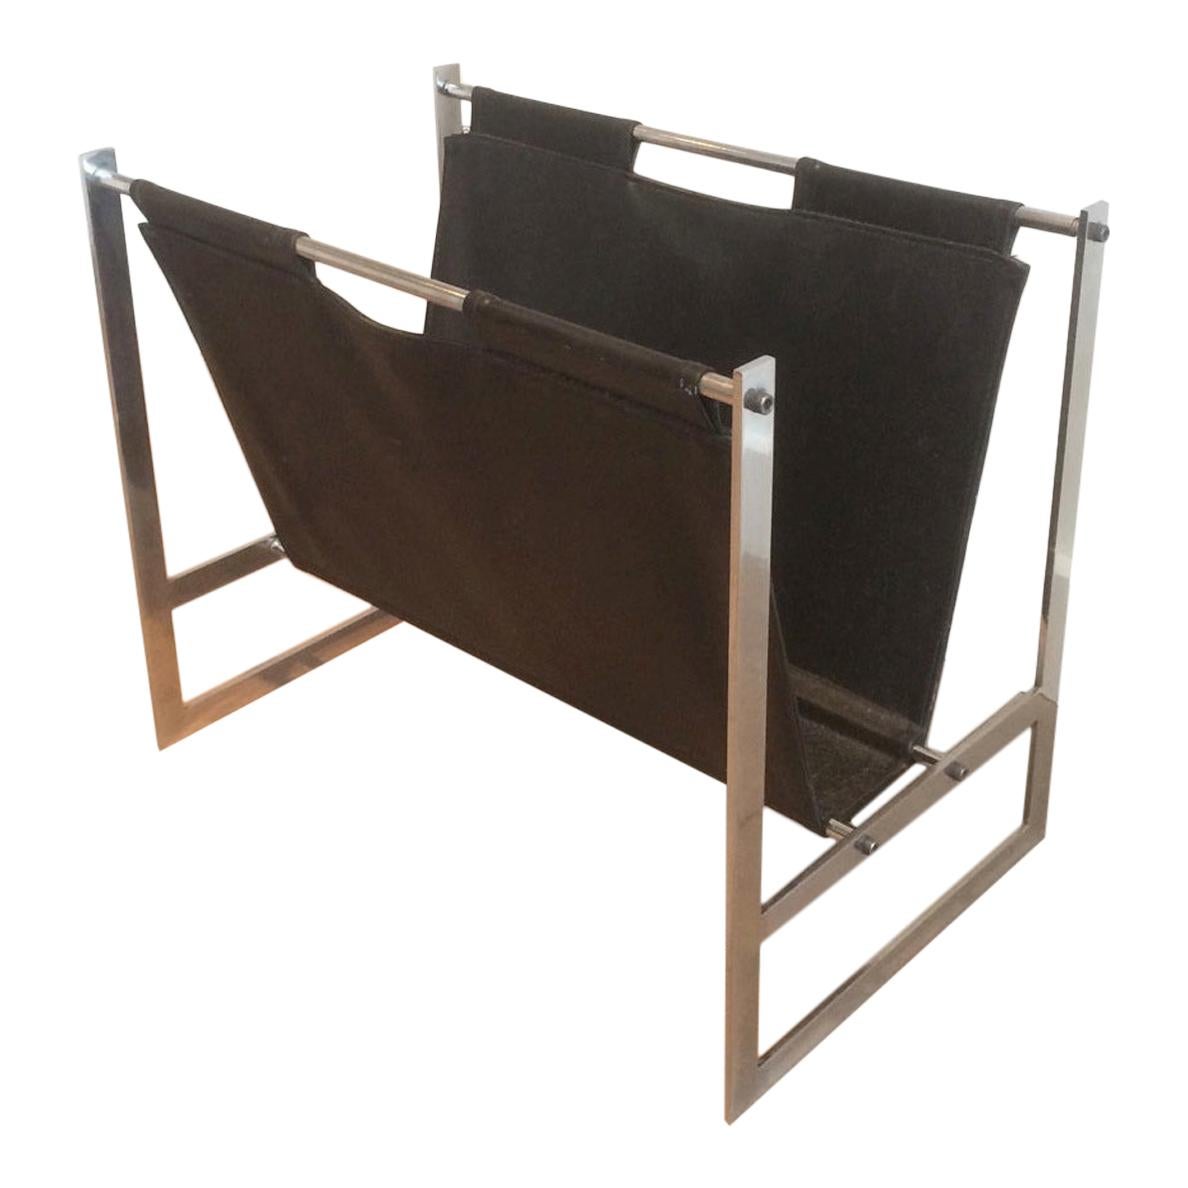 In the Style of Poul Kjaerholm, Brushed Steel and Black Leather Magazine Rack For Sale